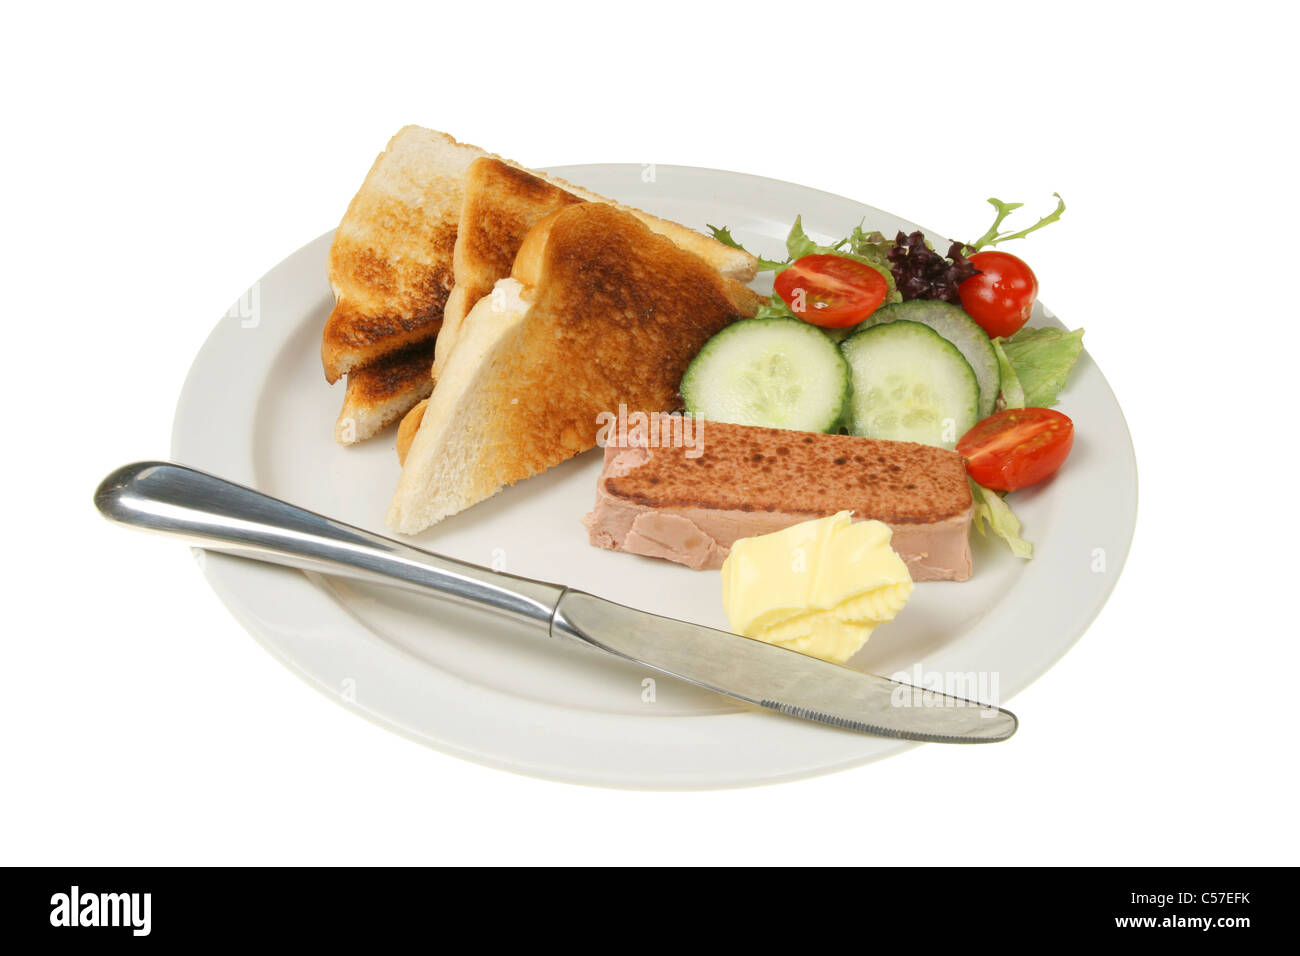 Pate toast and salad with a knife on a white plate Stock Photo